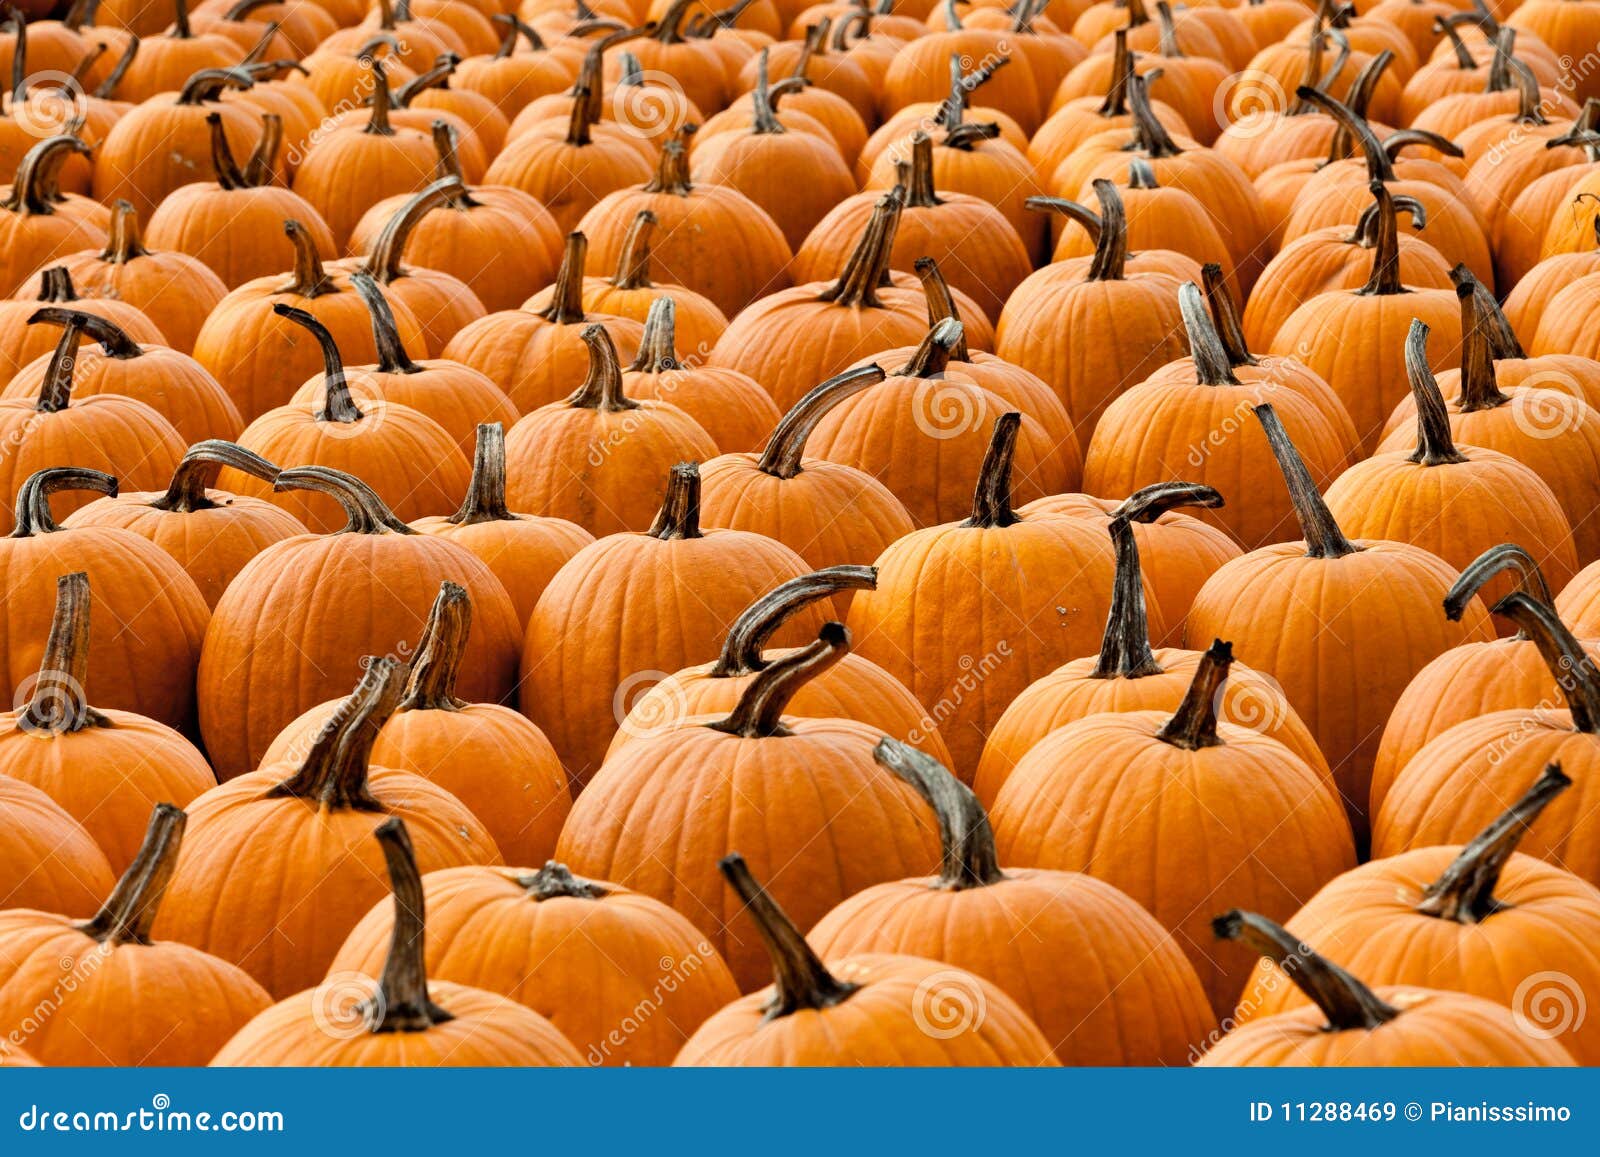 many-pumpkins-royalty-free-stock-images-image-11288469